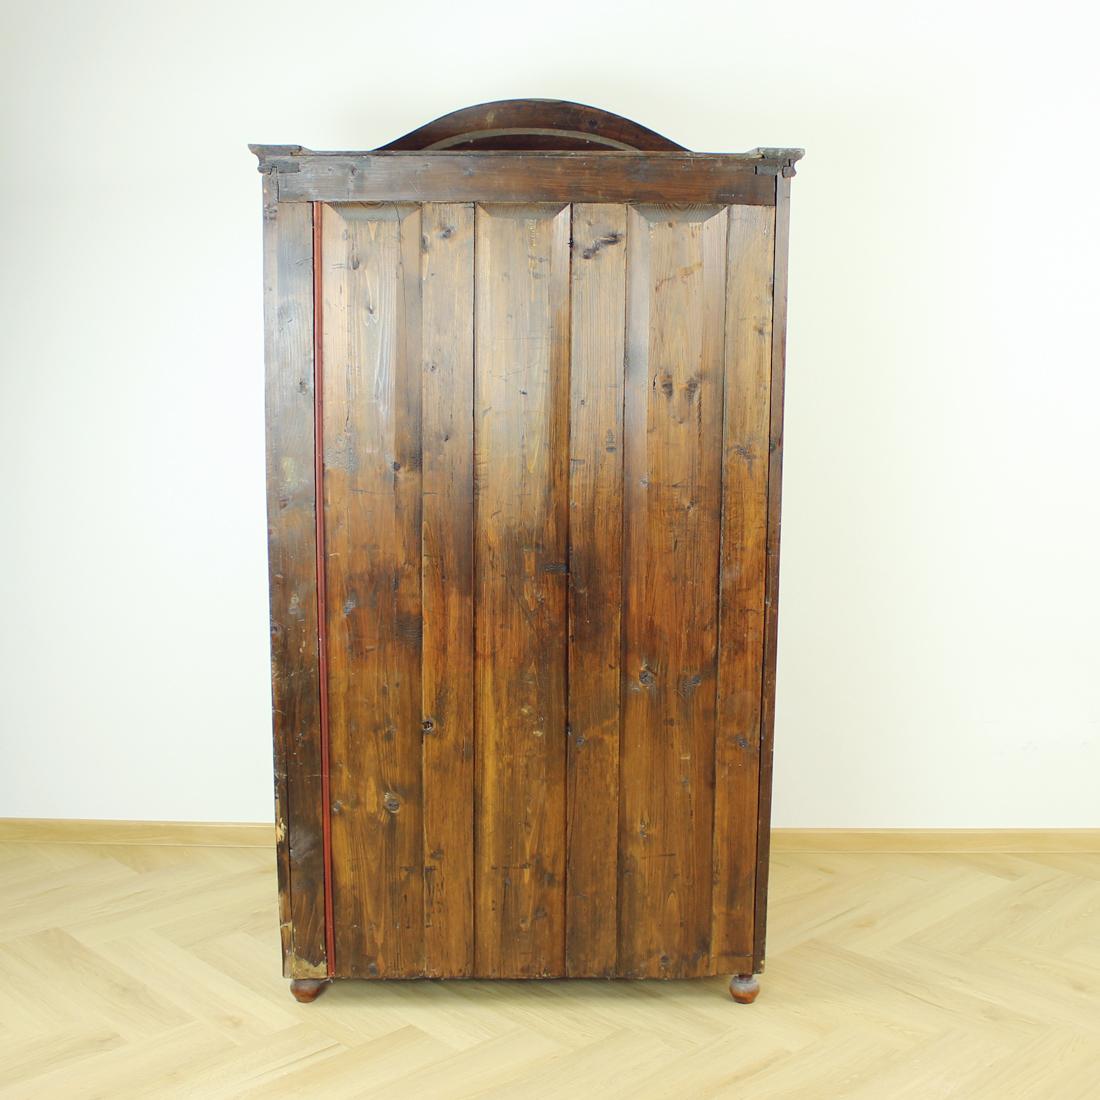 Beautiful and fully restored armoire. Produced in the end of 19th century in Czechoslovakia. Fully made of walnut wood. The armoire stands on four ball-like legs made of wood. The strong wooden doors with working lock hide 4 shelves inside. A